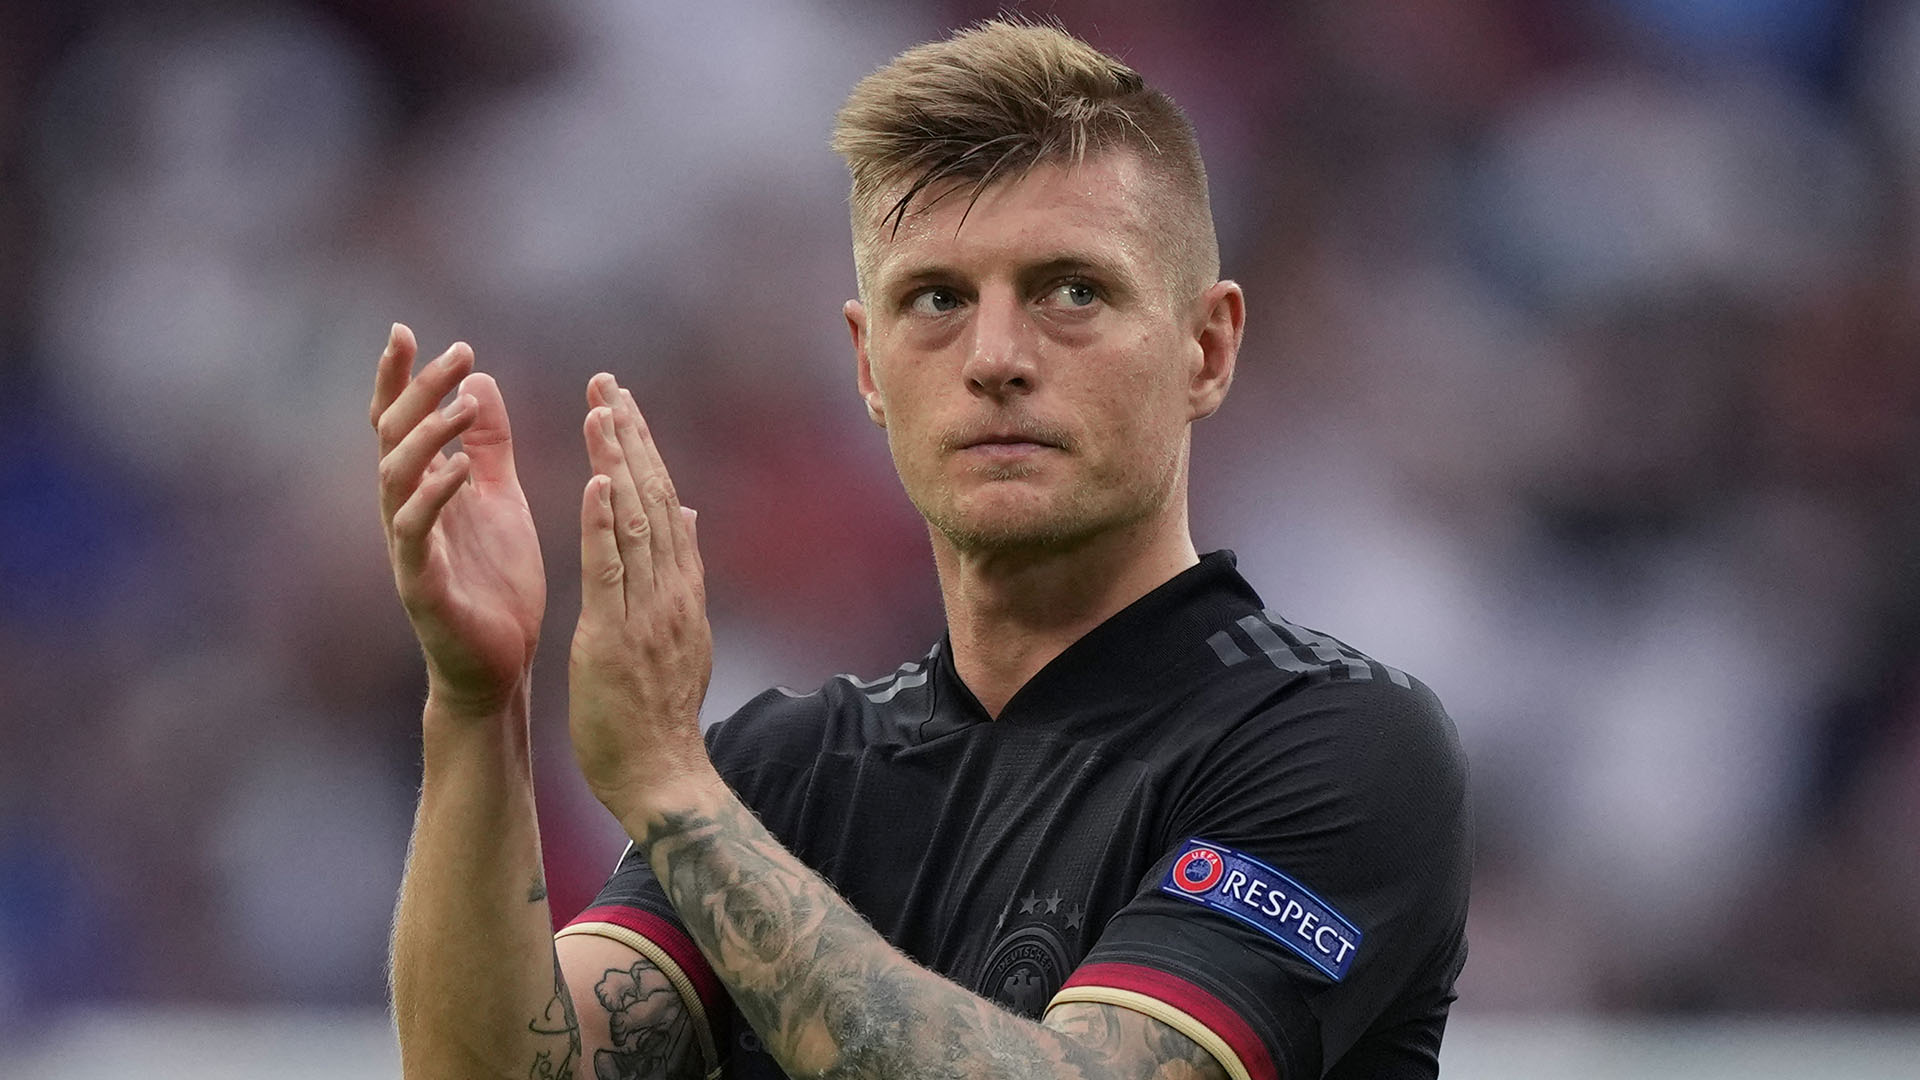 ‘I don’t agree with the way he plays’ – Matthaus criticises Kroos as Germany Euro 2020 fallout rumbles on